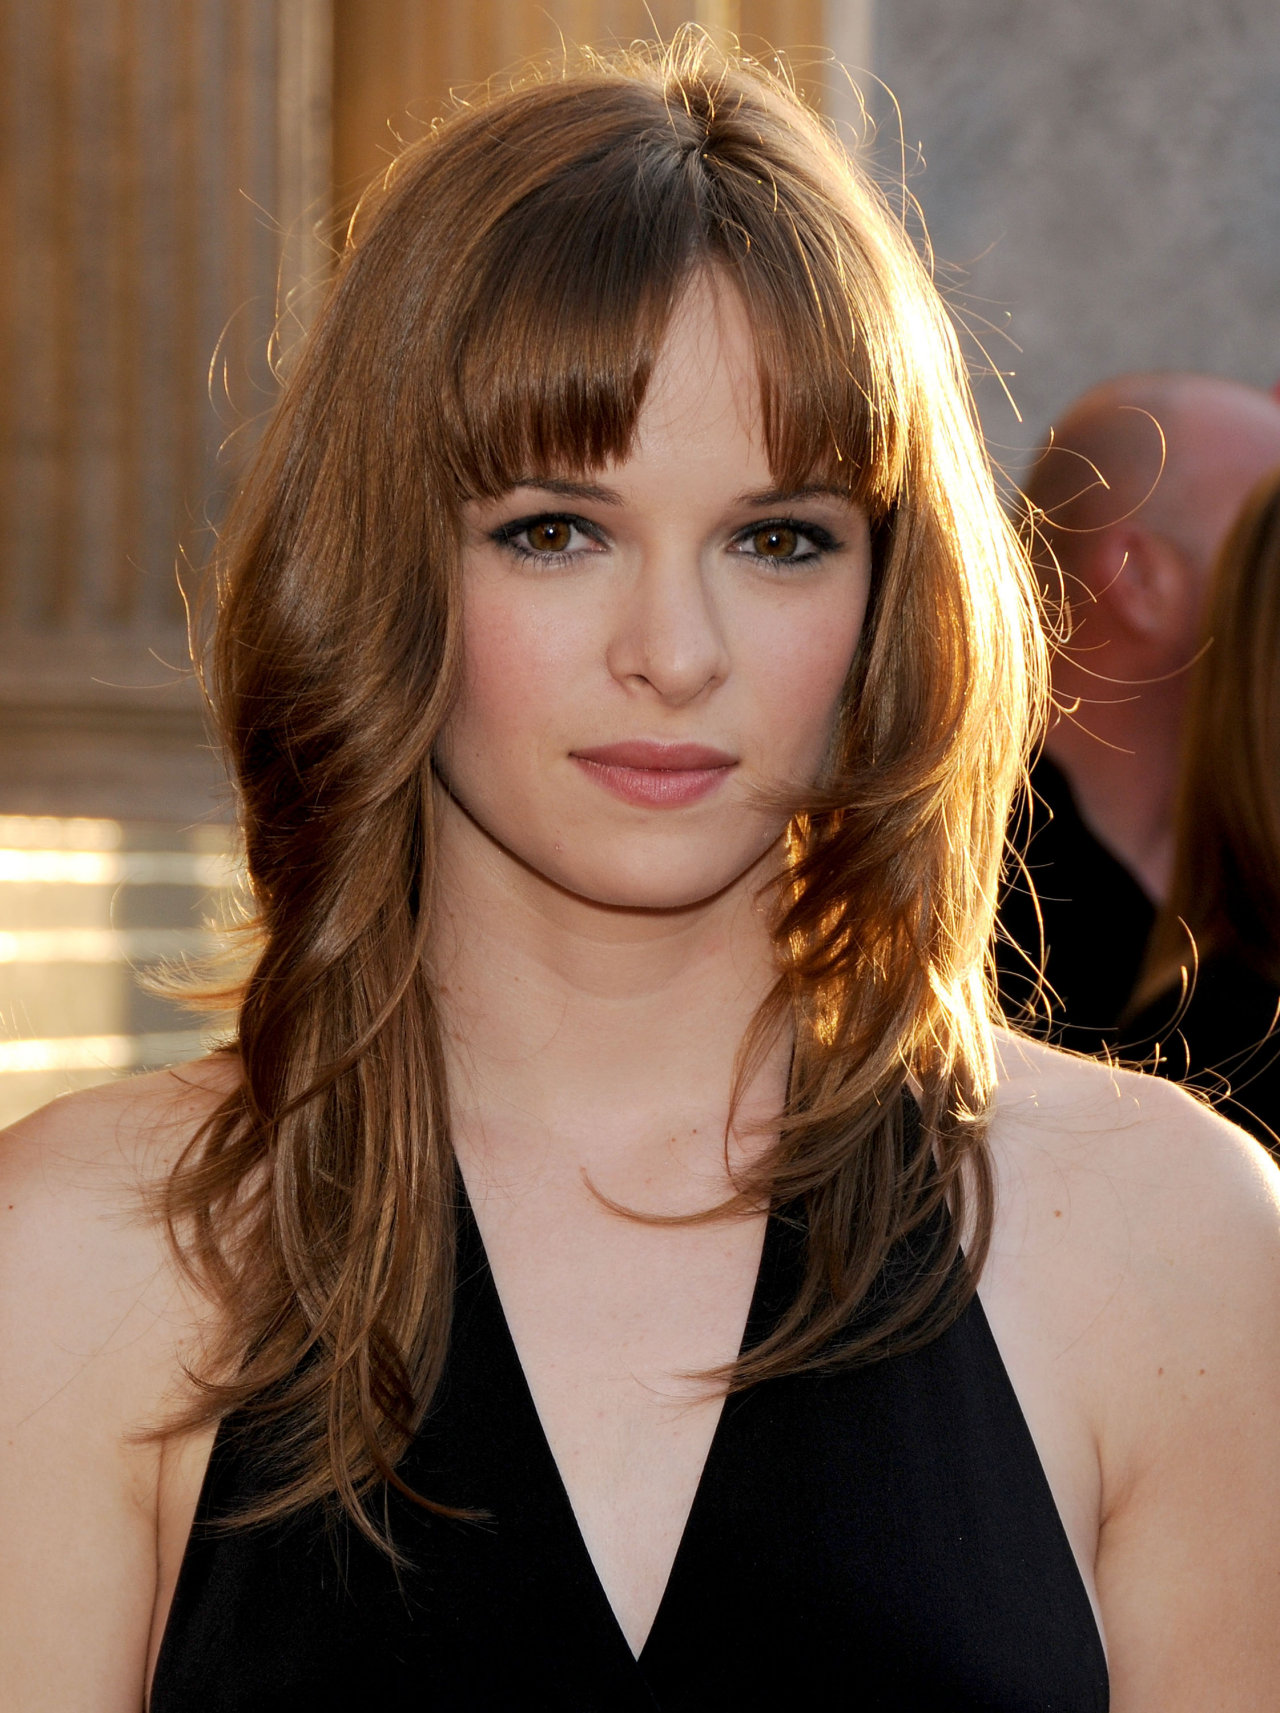 Danielle Panabaker leaked wallpapers